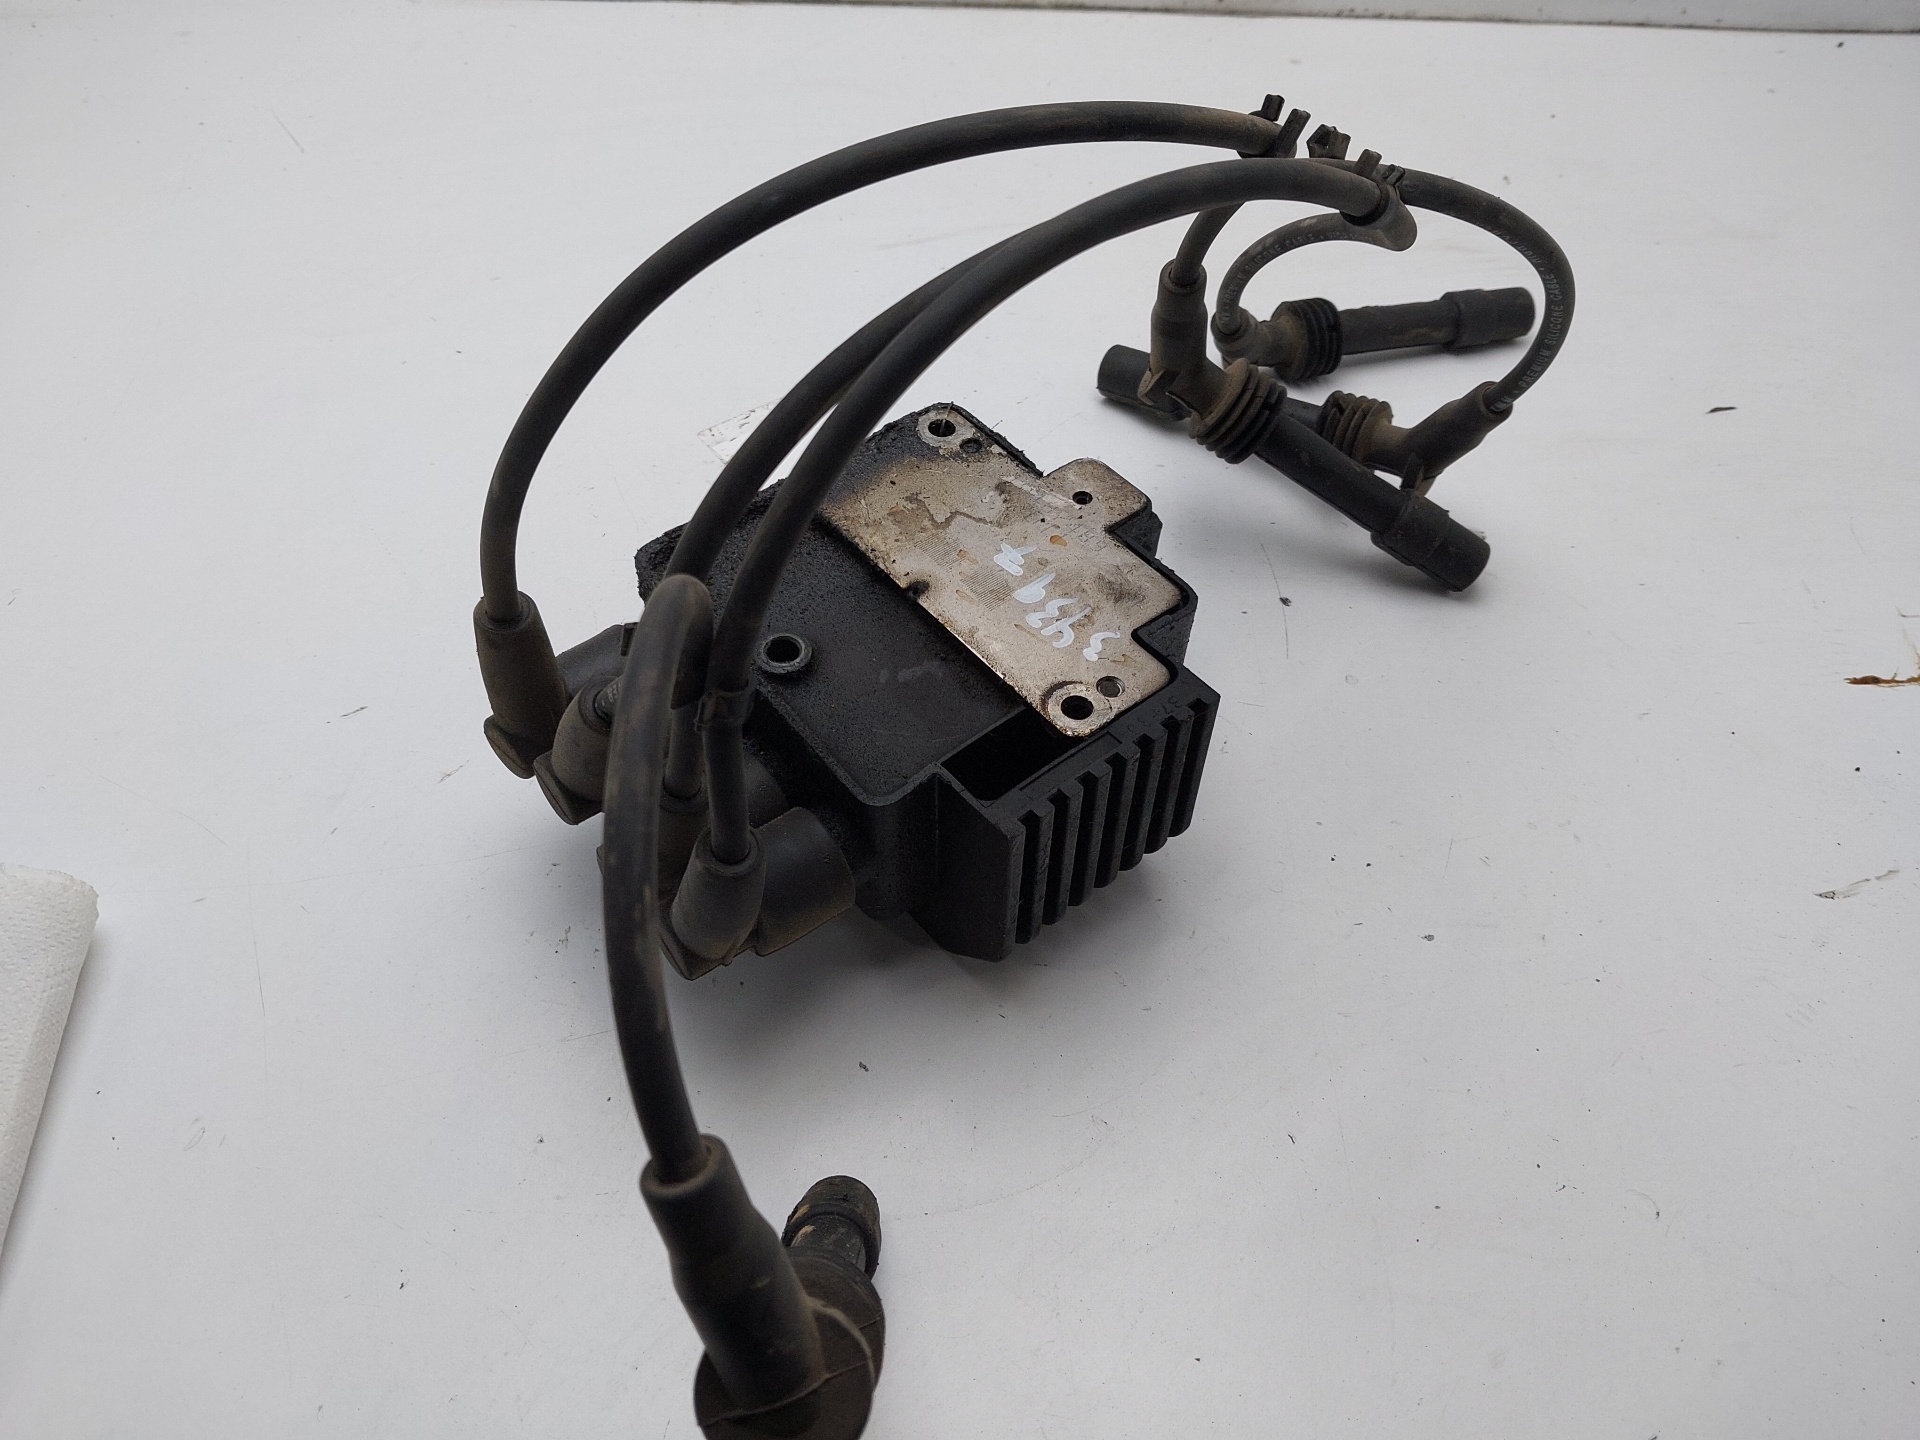 OPEL Corsa B (1993-2000) High Voltage Ignition Coil 1103872 24757955